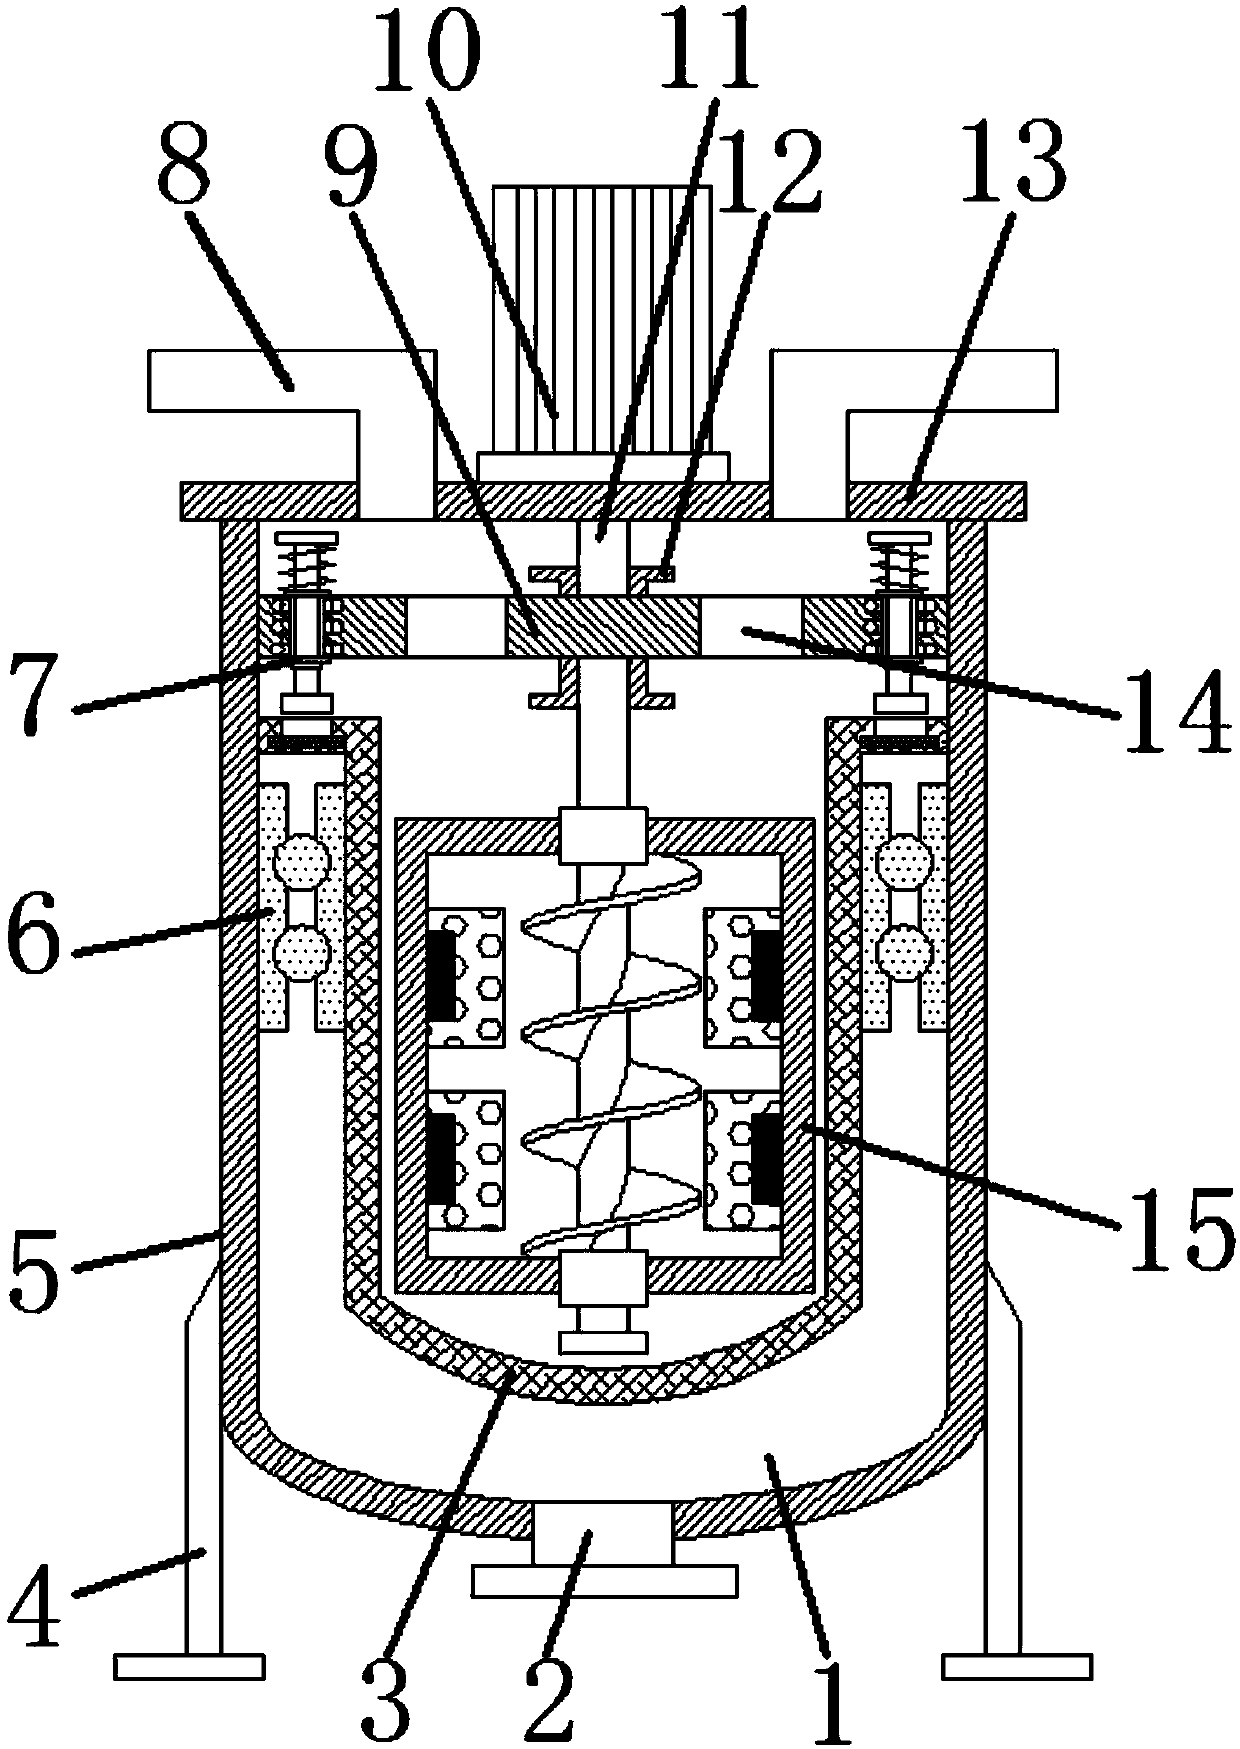 Building coating stirring and centrifugal separating device capable of removing ferromagnetic material